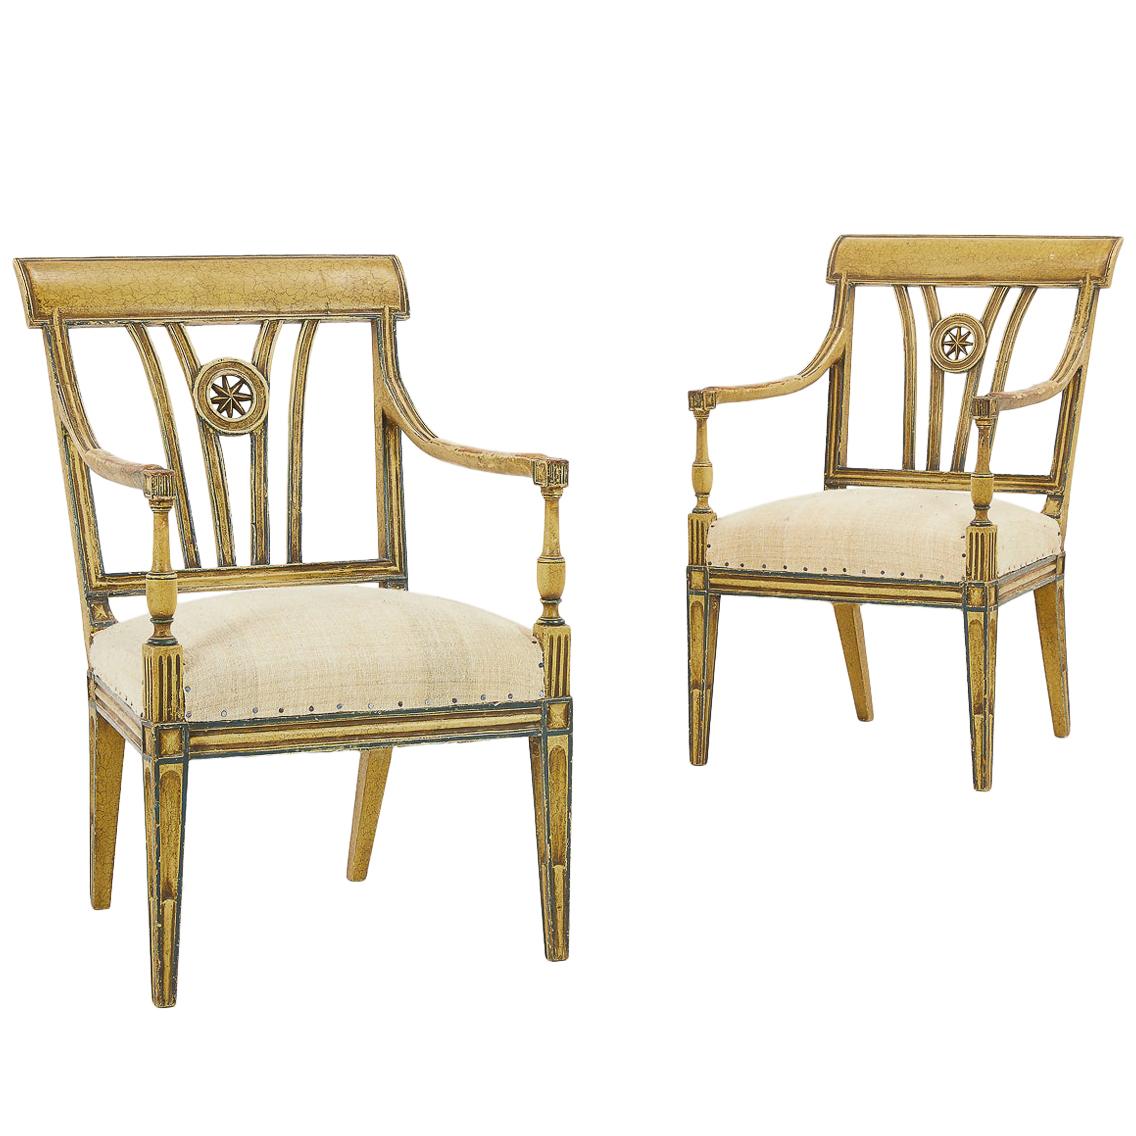 Pair of Early 20th Century Painted Chairs